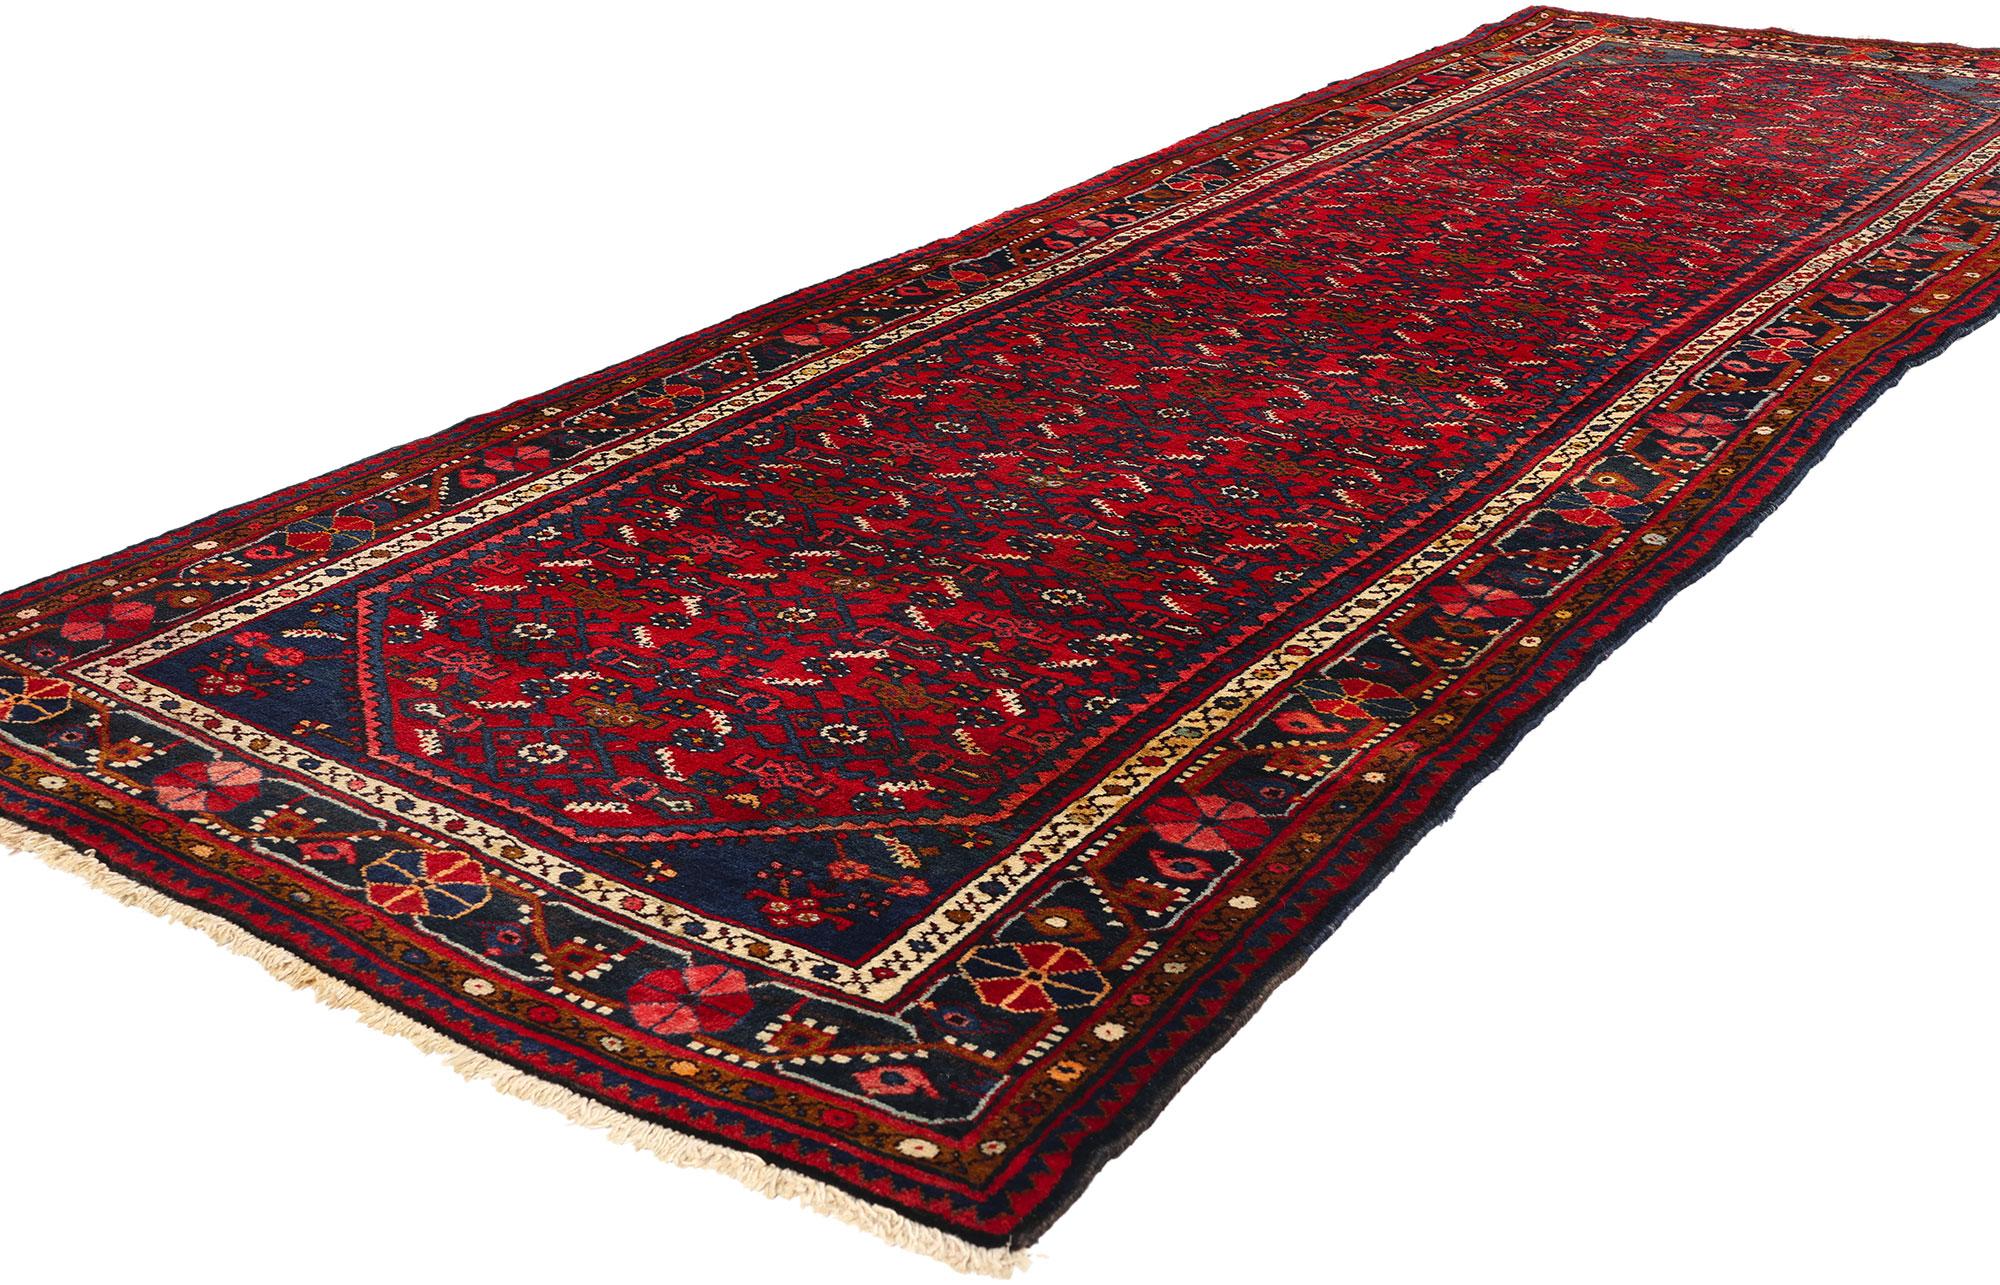 76135 Vintage Persian Hamadan Rug Runner, 03'09 X 10'10.  Crafted with meticulous care, this vintage Persian Hussainabad Hamadan runner showcases a captivating all-over Herati pattern woven into its abrashed red field. The intricate Herati motif,